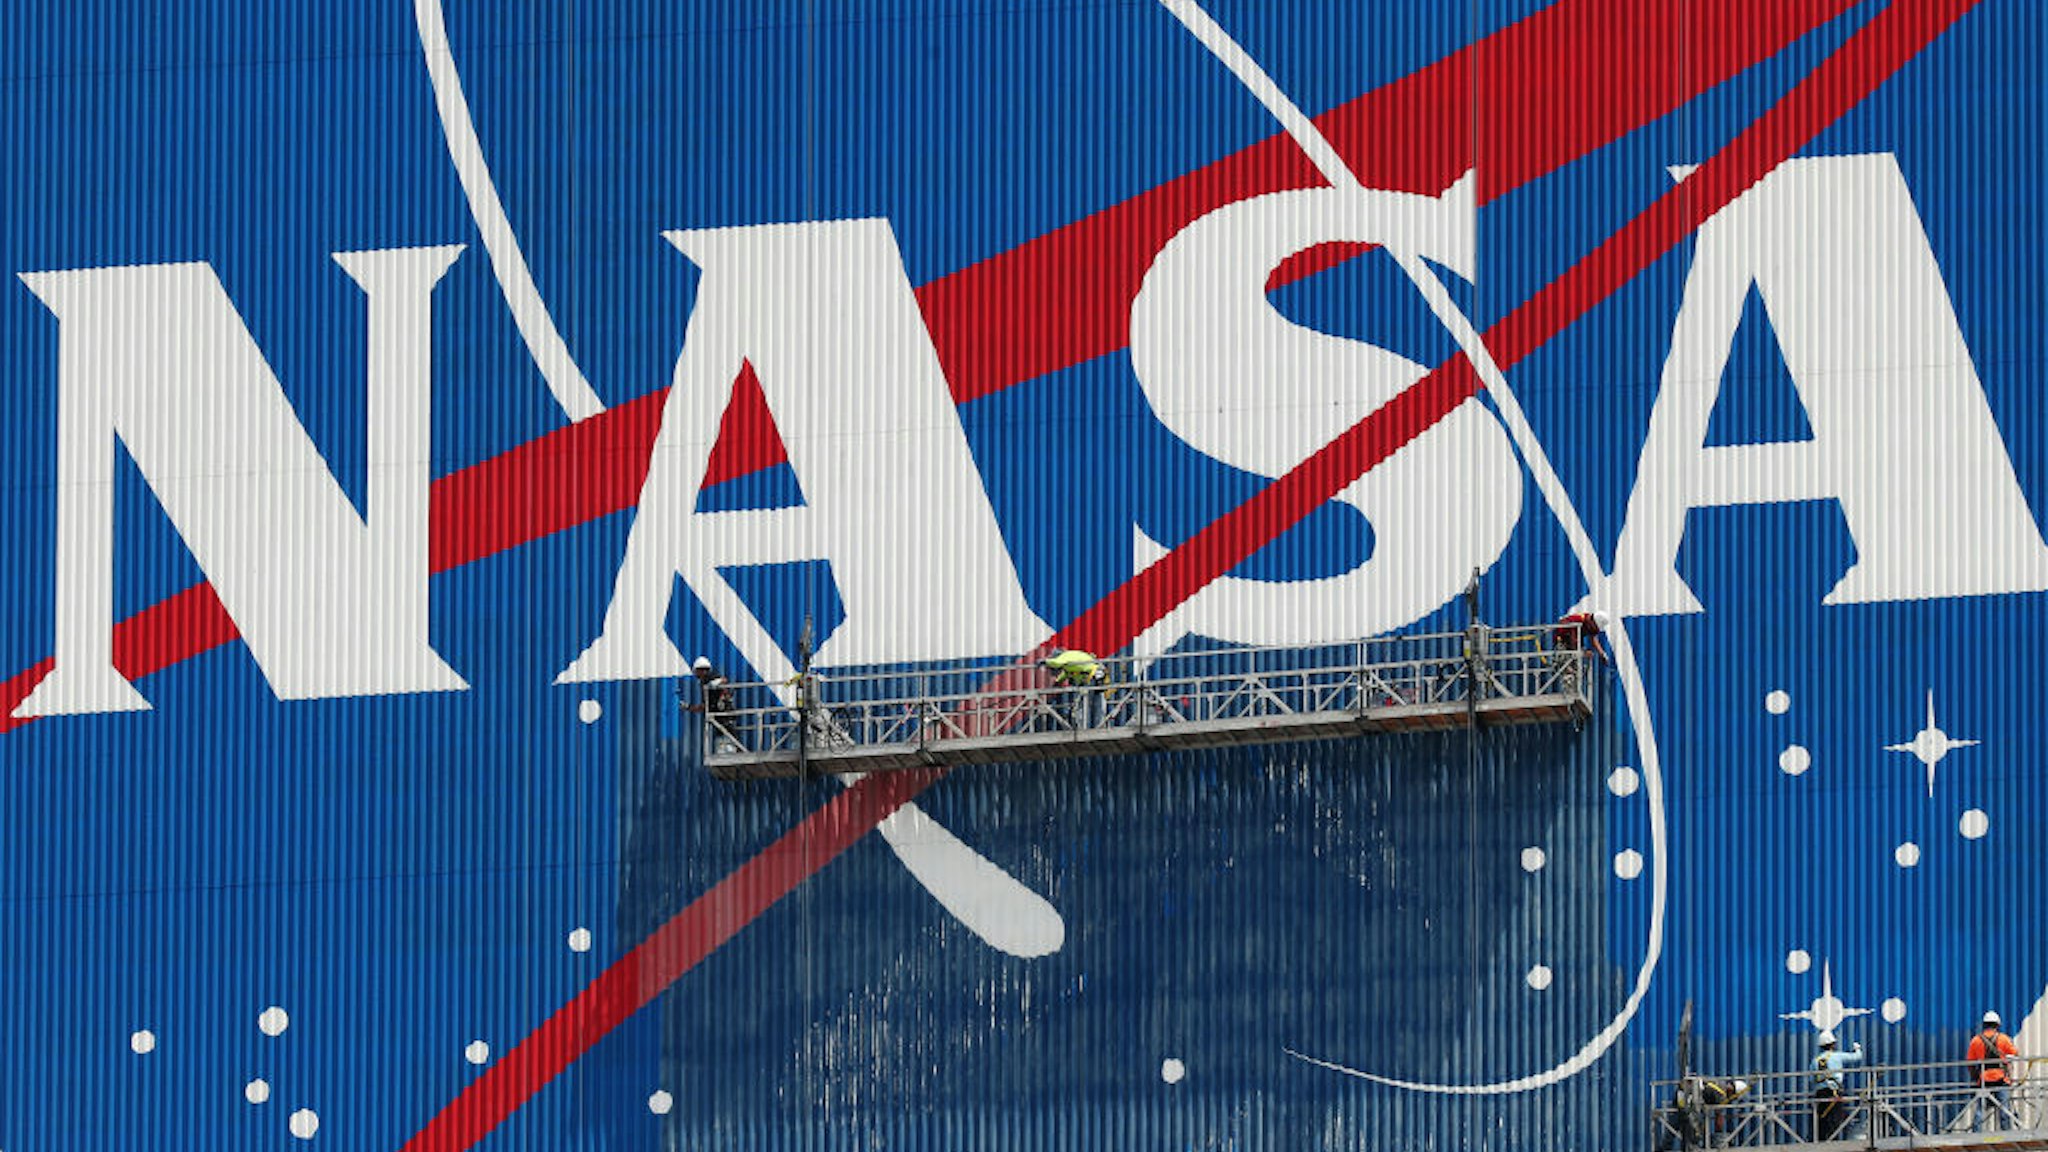 CAPE CANAVERAL, FLORIDA - MAY 28: Workers repaint the NASA logo on the Vehicle Assembly Building at the Kennedy Space Center on May 28, 2020 in Cape Canaveral, Florida. SpaceX’s Crew Dragon spacecraft will try to launch again on Saturday after weather scrubbed yesterday's attempt. It will be the first manned mission since the end of the Space Shuttle program in 2011 to be launched into space from the United States.